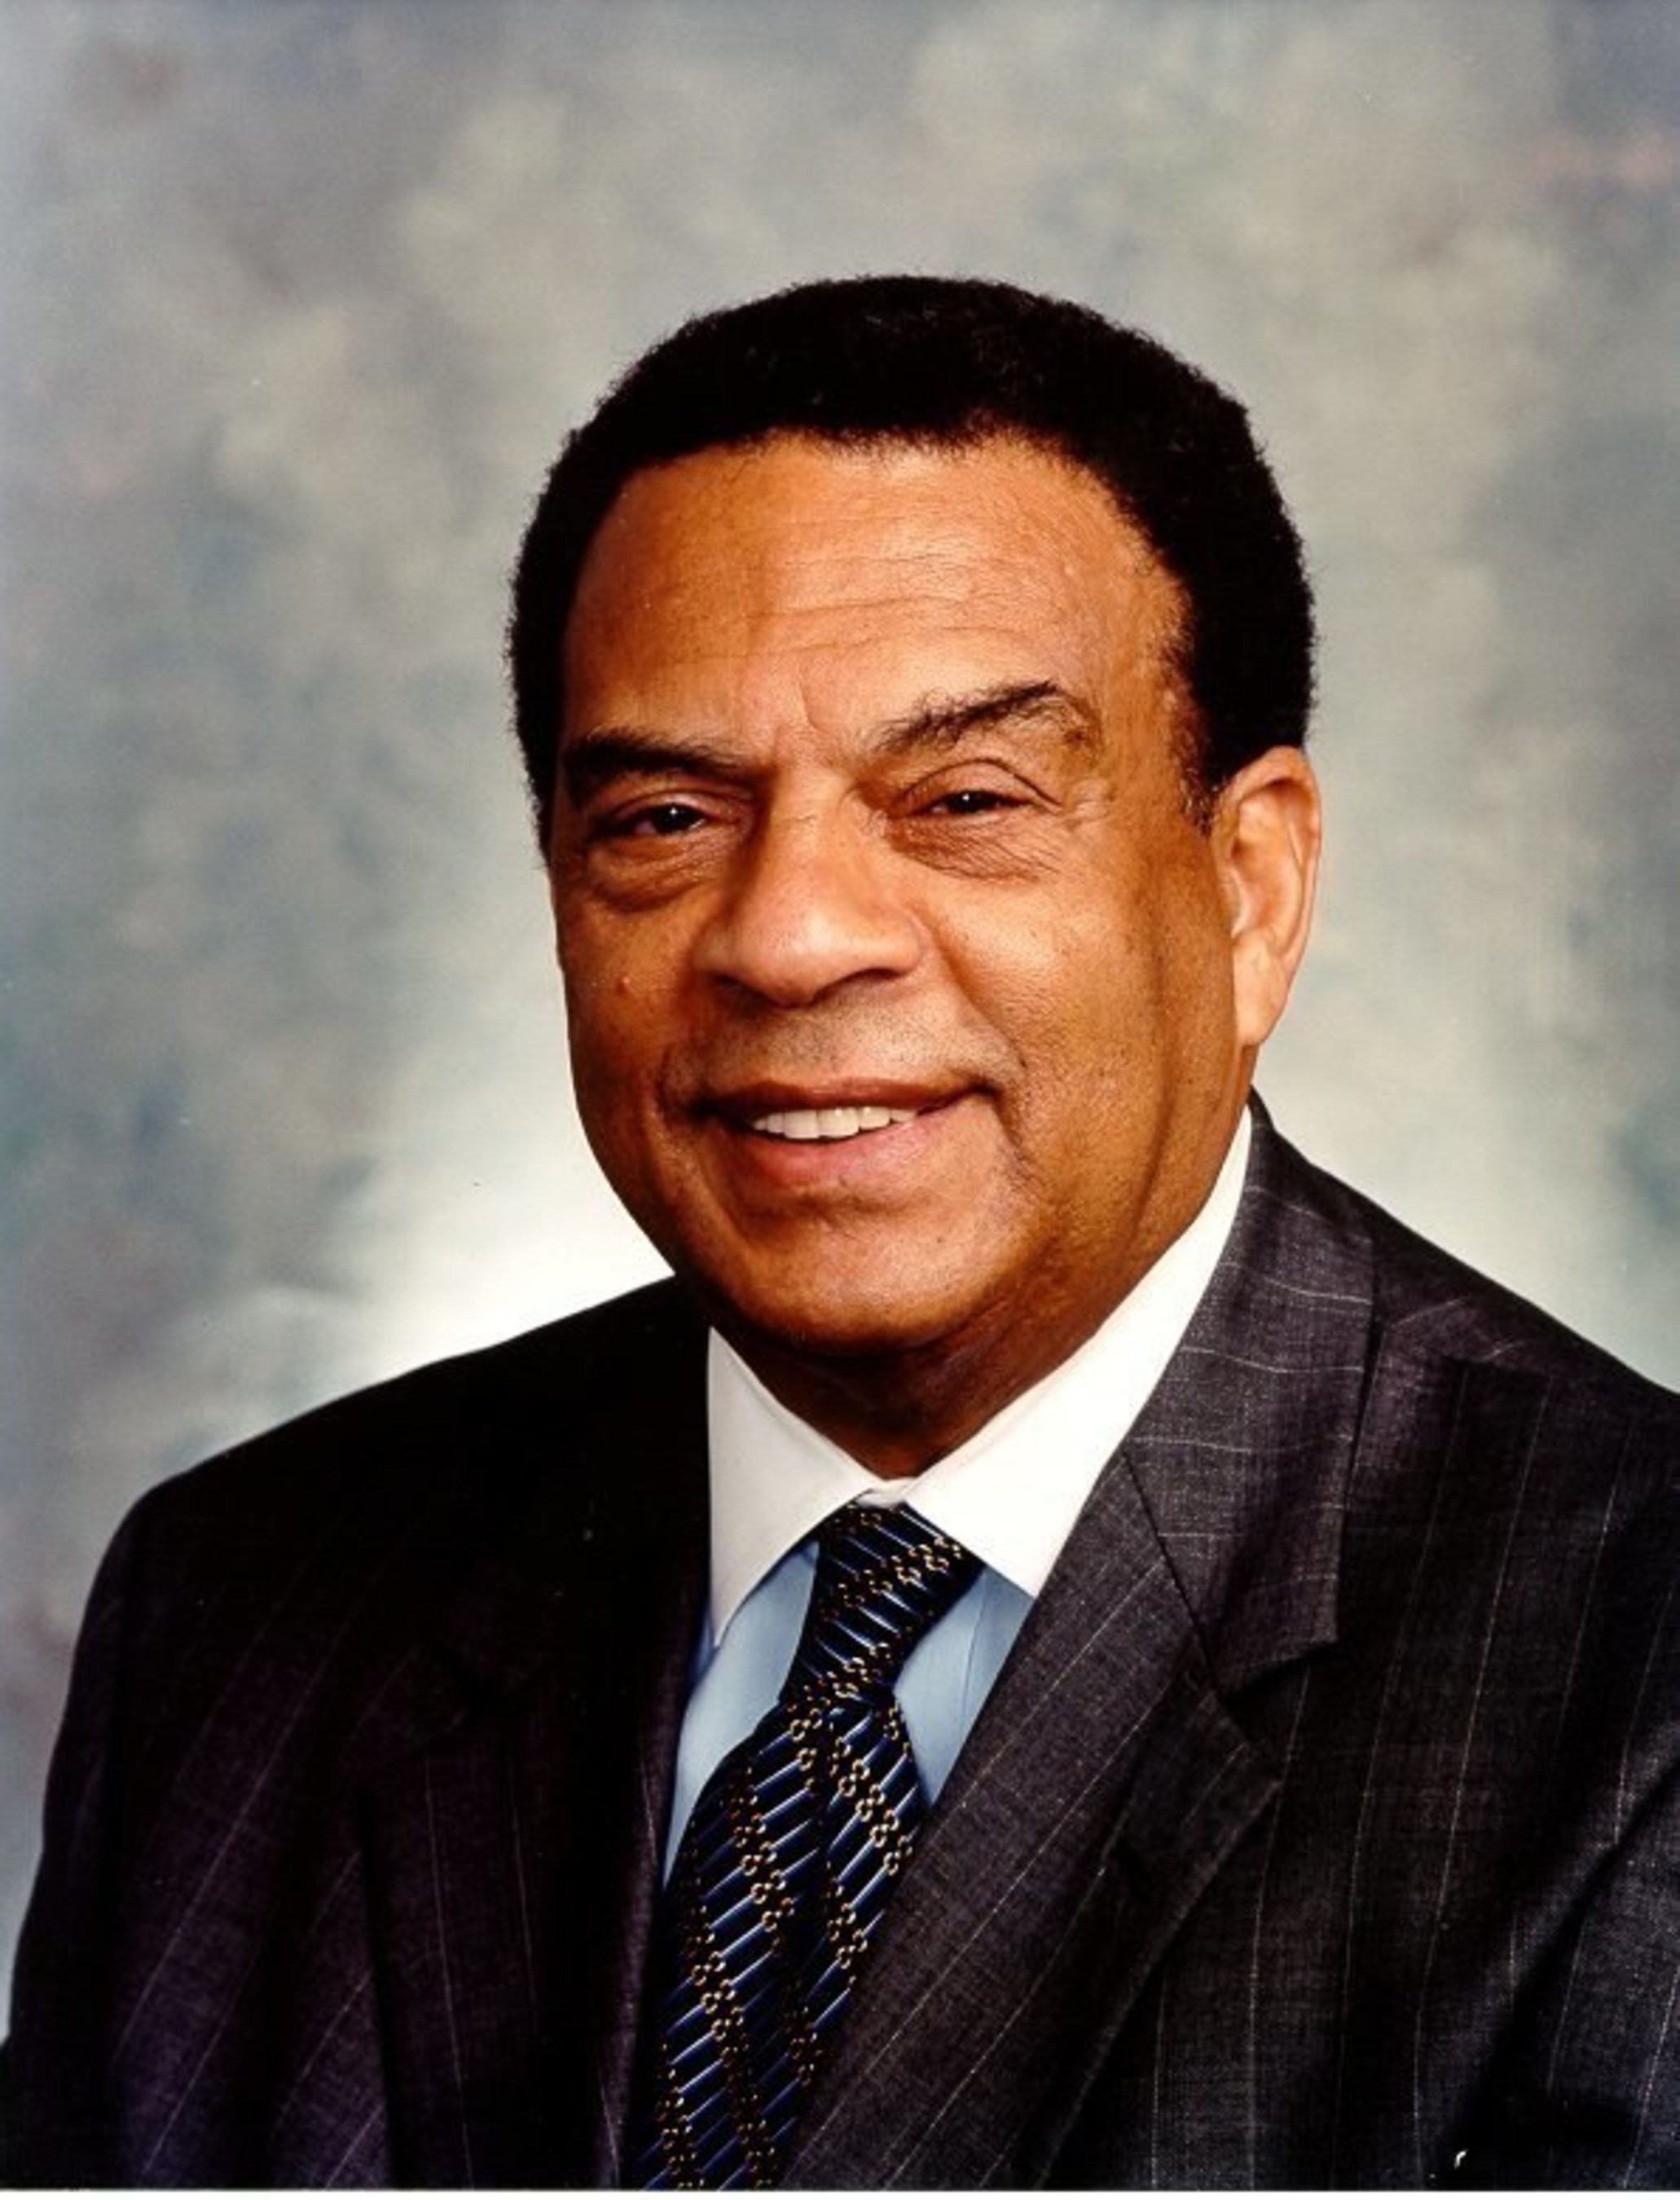 Former Atlanta Mayor and U.S. Ambassador Andrew Young has sent a powerful letter to Gov. Deal and House Speaker Ralston calling for a repeal of Georgia's water fluoridation law, which remains in effect despite burgeoning evidence that drinking fluoride chemicals is not safe nor is it effective for cavity reduction.